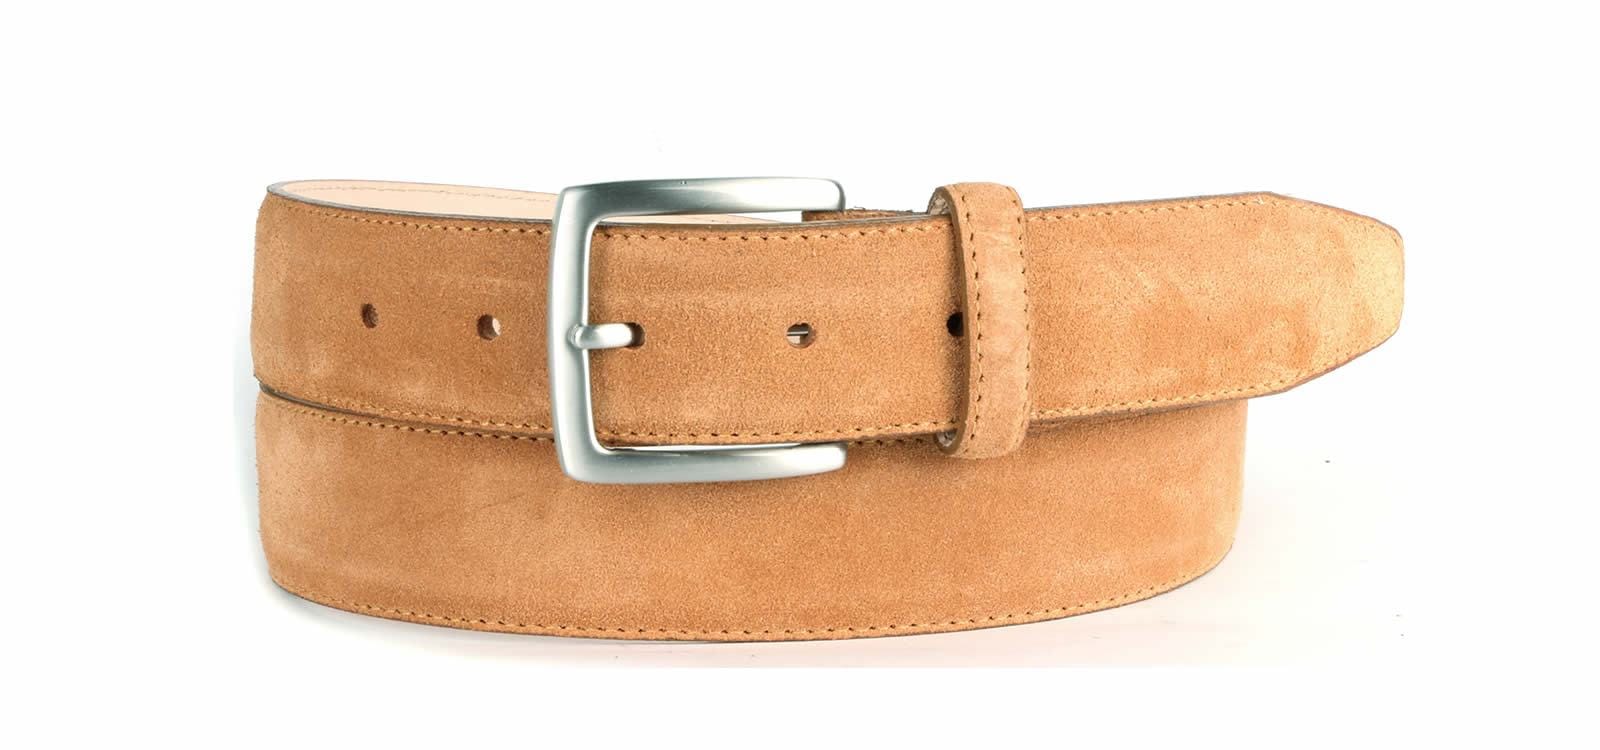 Buy Mens belt for jeans leather: Brown Camel Tan Suede, Wide